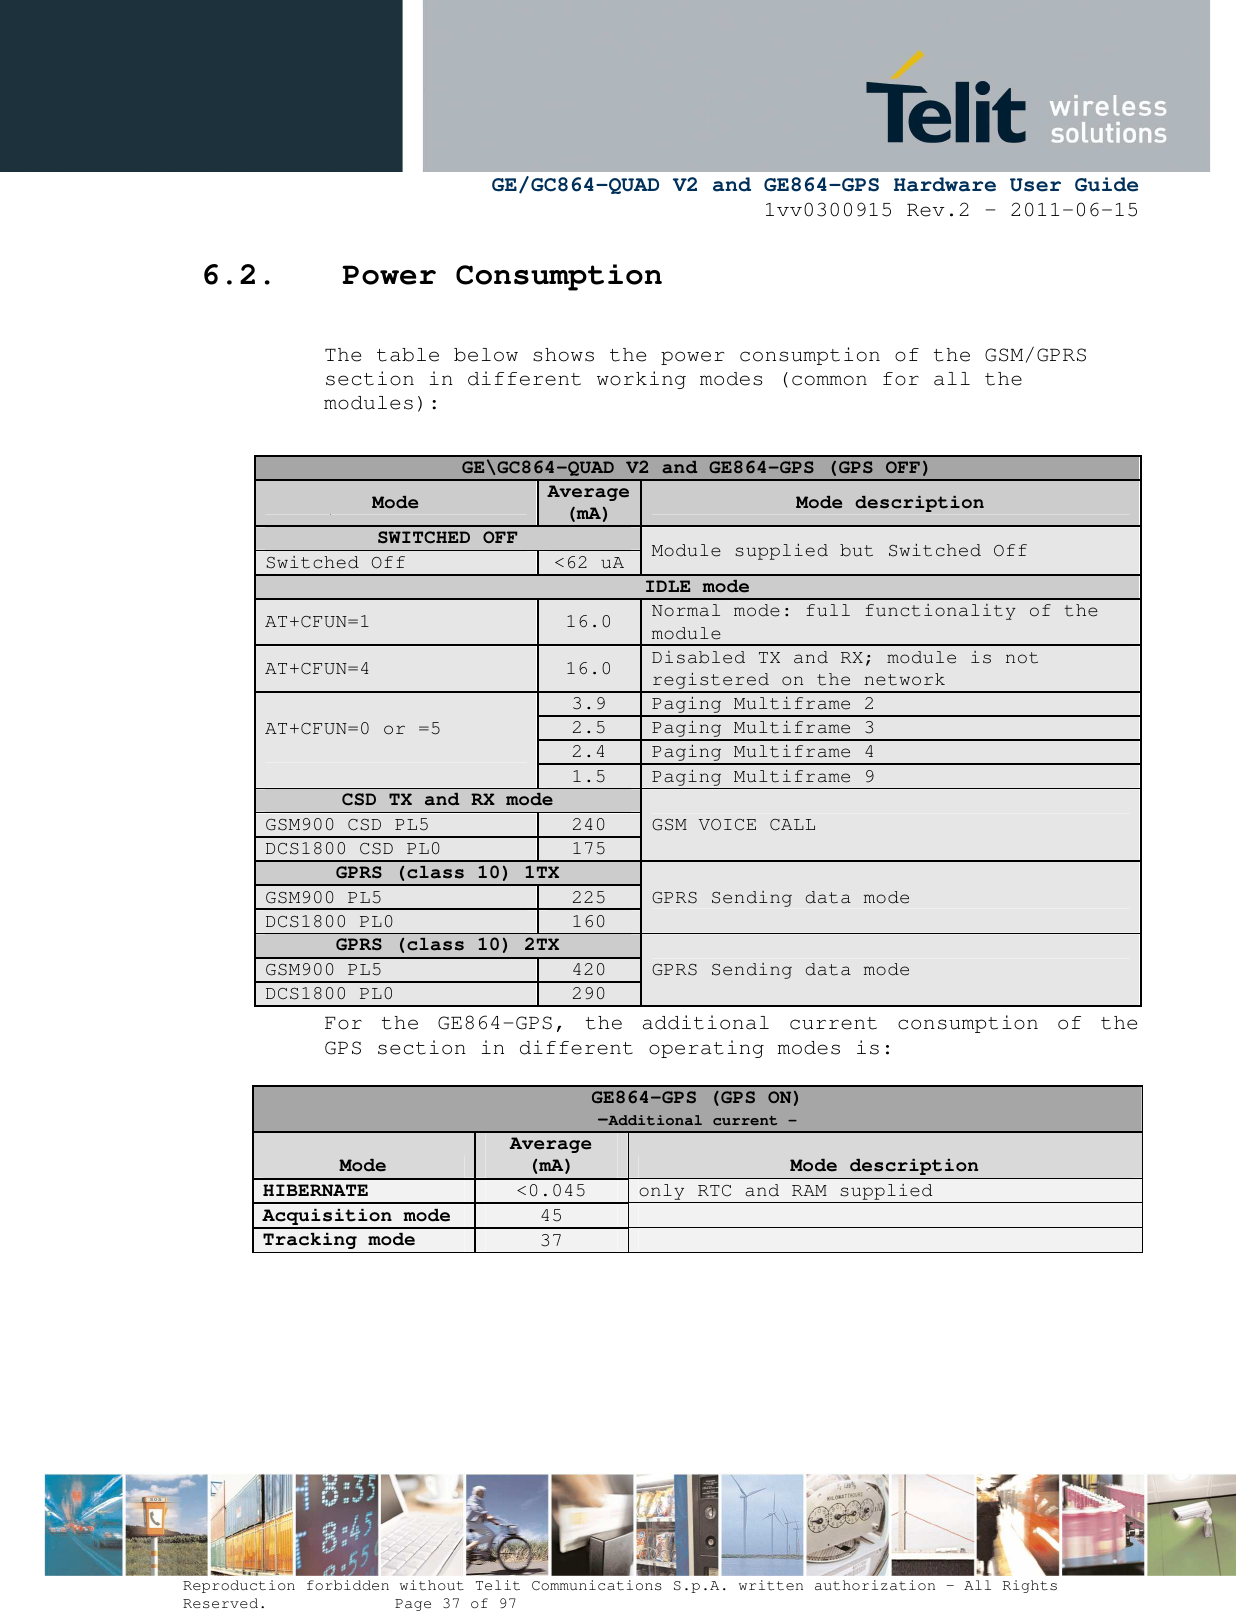      GE/GC864-QUAD V2 and GE864-GPS Hardware User Guide 1vv0300915 Rev.2 – 2011-06-15  Reproduction forbidden without Telit Communications S.p.A. written authorization - All Rights Reserved.    Page 37 of 97  6.2. Power Consumption  The table below shows the power consumption of the GSM/GPRS section in different working modes (common for all the modules):    The GSM system is ma  For  the  GE864-GPS,  the  additional  current  consumption  of  the GPS section in different operating modes is:  GE864-GPS (GPS ON) -Additional current - Mode  Average (mA)  Mode description HIBERNATE &lt;0.045  only RTC and RAM supplied Acquisition mode  45   Tracking mode  37      GE\GC864-QUAD V2 and GE864-GPS (GPS OFF) Mode Average (mA)  Mode description SWITCHED OFF  Module supplied but Switched Off Switched Off  &lt;62 uA IDLE mode AT+CFUN=1  16.0  Normal mode: full functionality of the module AT+CFUN=4  16.0  Disabled TX and RX; module is not registered on the network AT+CFUN=0 or =5  3.9  Paging Multiframe 2 2.5  Paging Multiframe 3 2.4  Paging Multiframe 4 1.5  Paging Multiframe 9 CSD TX and RX mode GSM VOICE CALL GSM900 CSD PL5  240 DCS1800 CSD PL0  175 GPRS (class 10) 1TX GPRS Sending data mode GSM900 PL5  225 DCS1800 PL0  160 GPRS (class 10) 2TX GPRS Sending data mode GSM900 PL5  420 DCS1800 PL0  290 